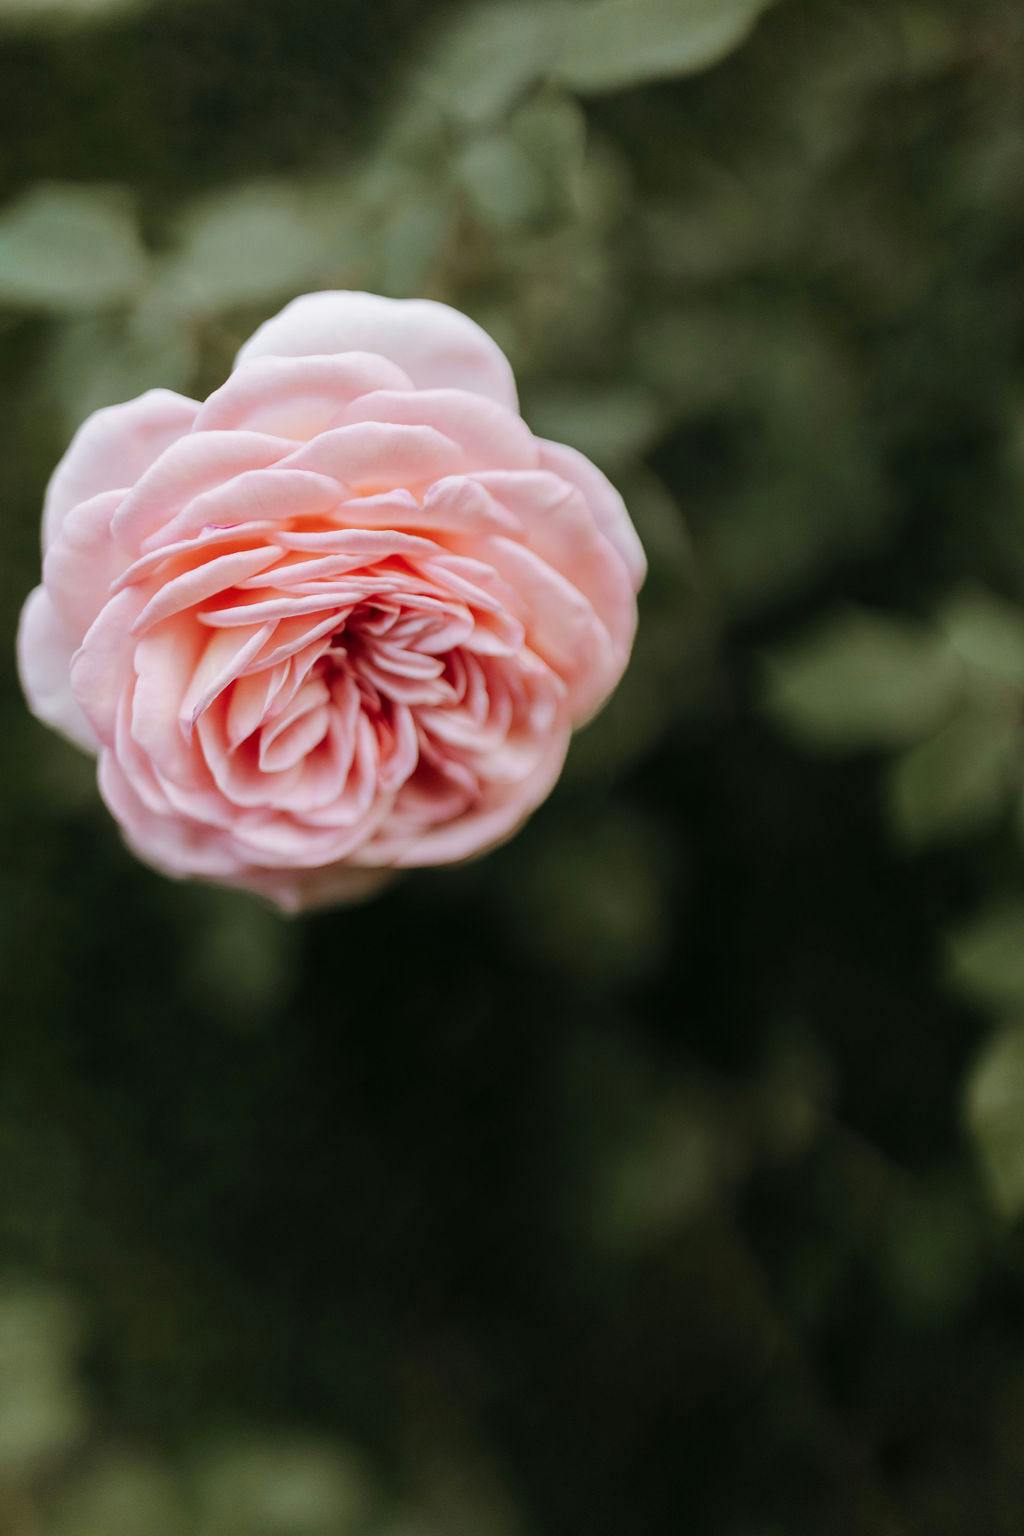 A close-up view of a single blooming pink rose against a blurred green background. The intricate petals are delicately layered, showcasing the flower's natural beauty.